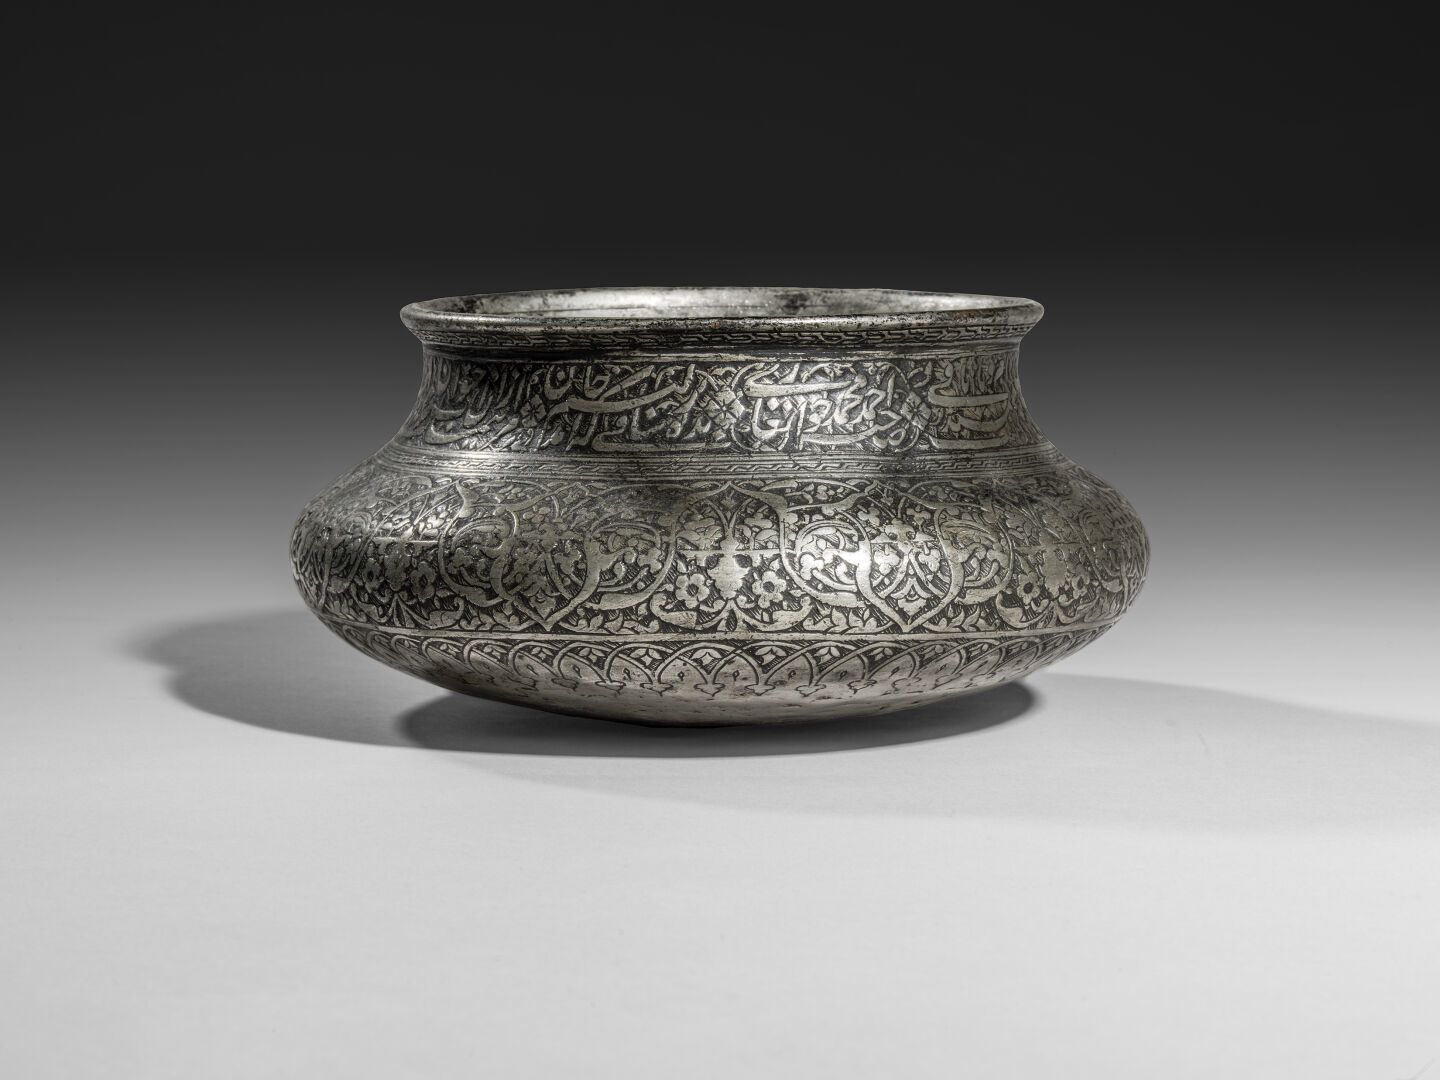 Null Bidri spittoon inlaid with silver and decorated with kufic characters

Iran&hellip;